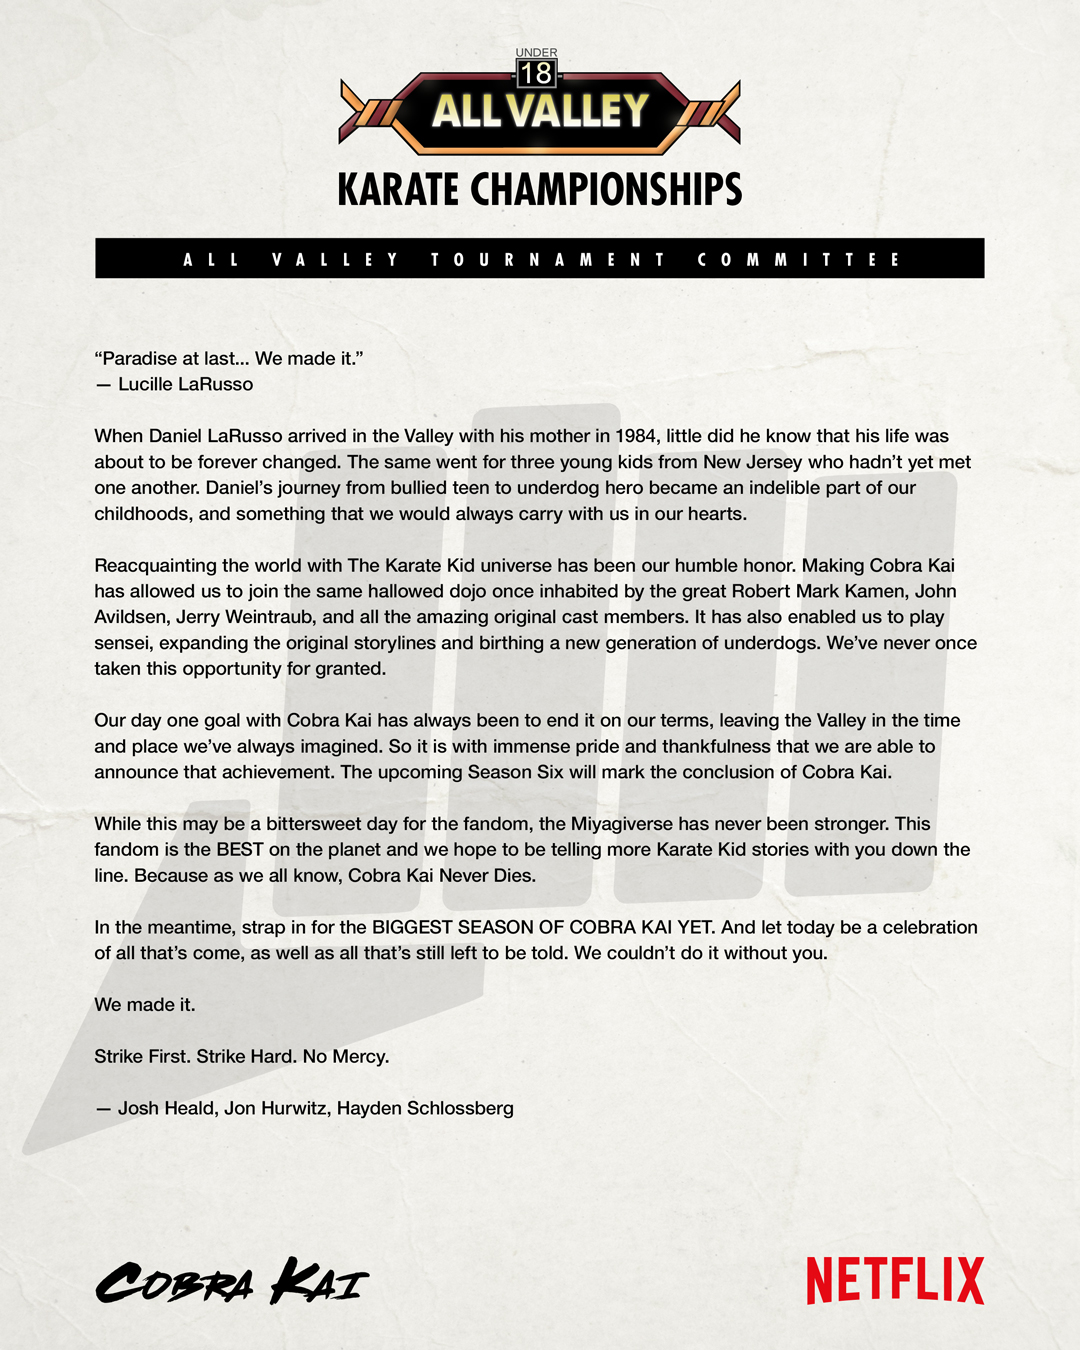 After season 6, more Miyagiverse to come, as Cobra Kai creators Josh Heald, Jon Hurwitz, and Hayden Schlossberg shared a joint message today saying that they want to make more Karate Kid spinoff stories.